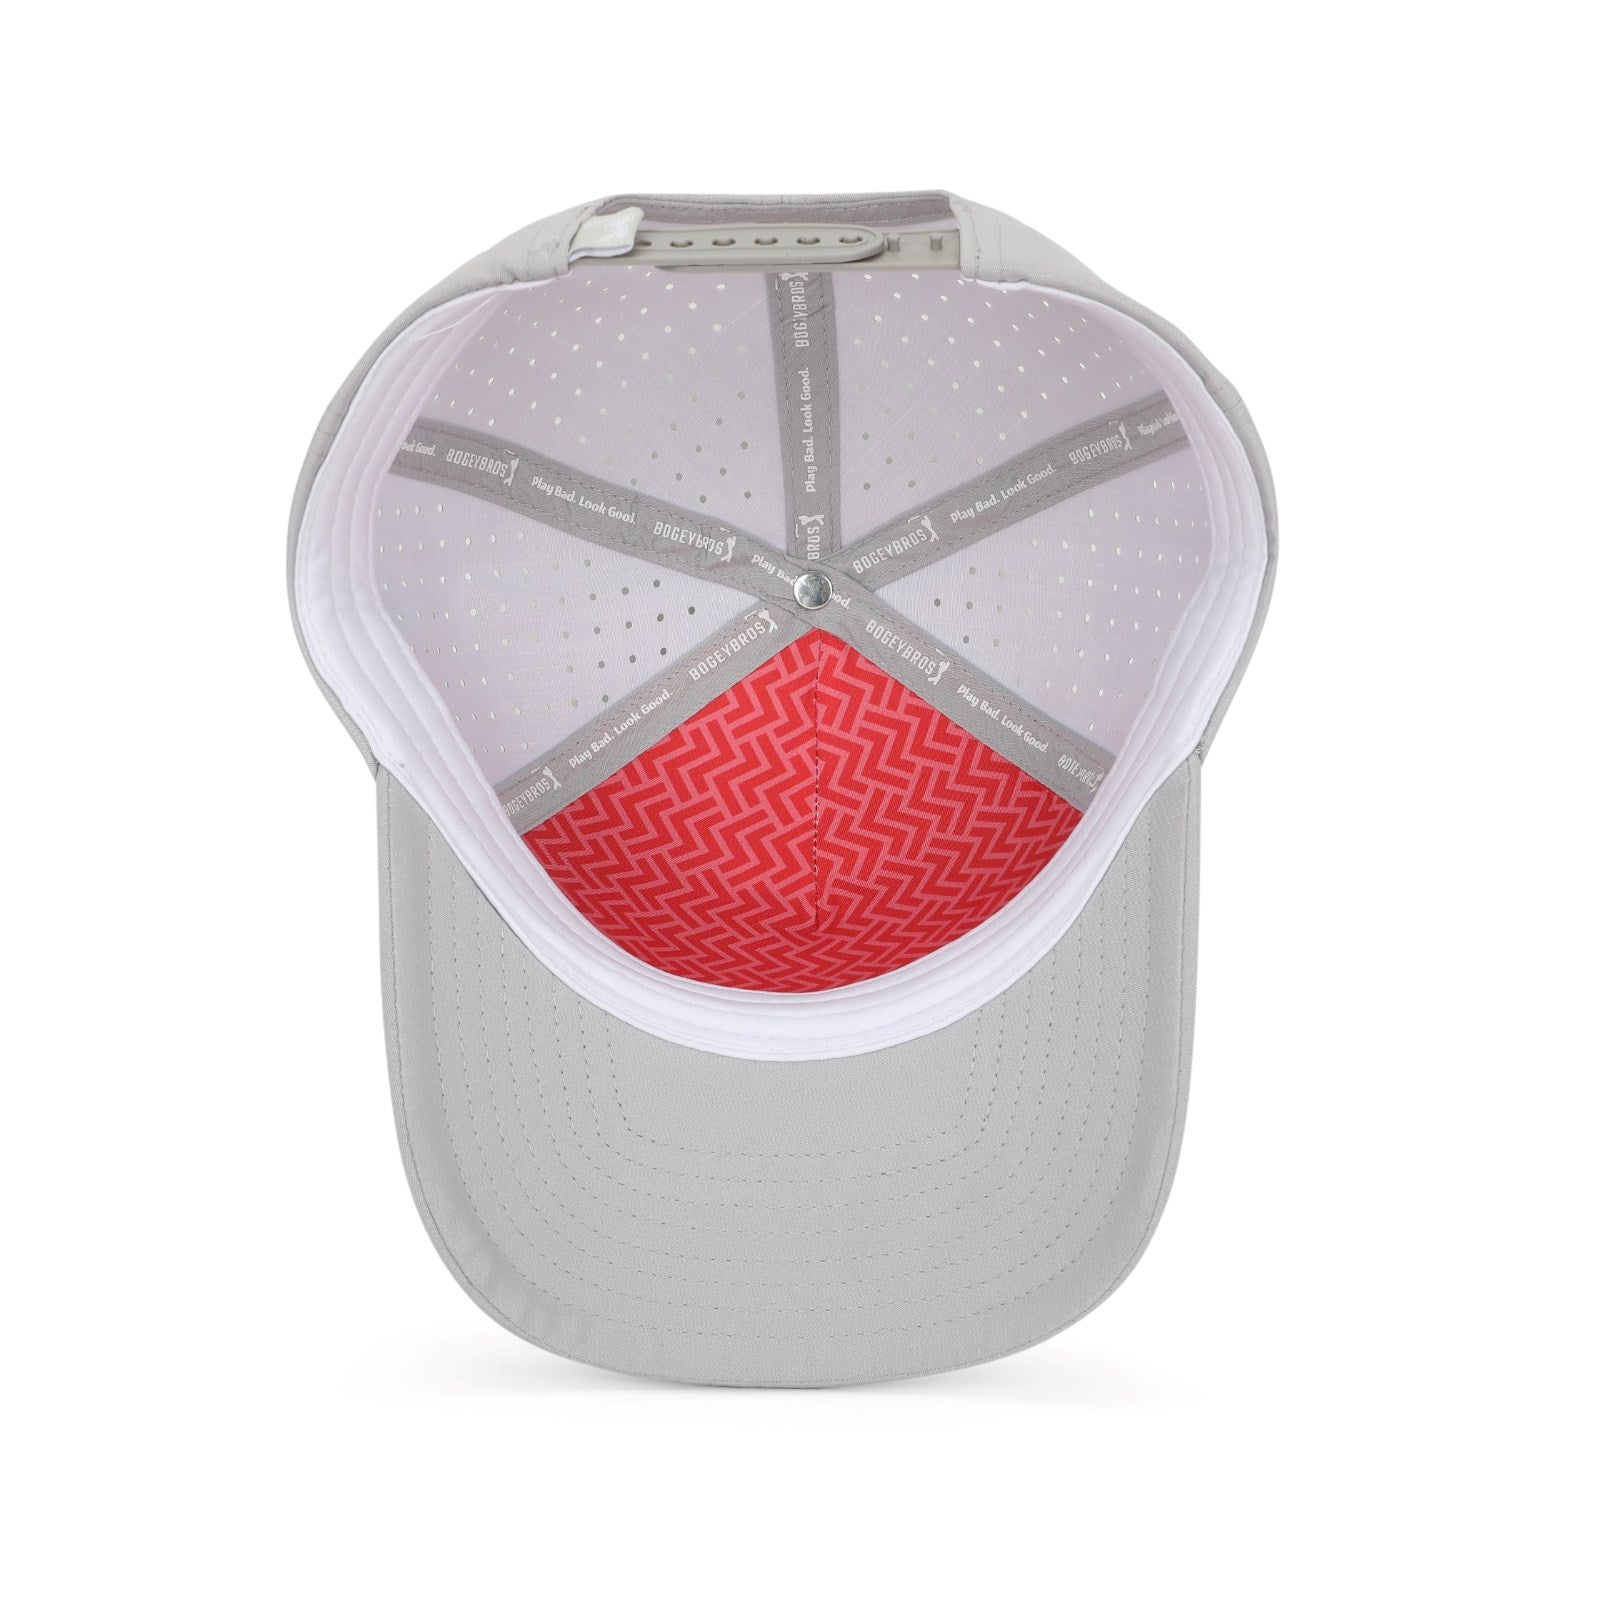 Curves Right - Performance Golf Hat - Snapback